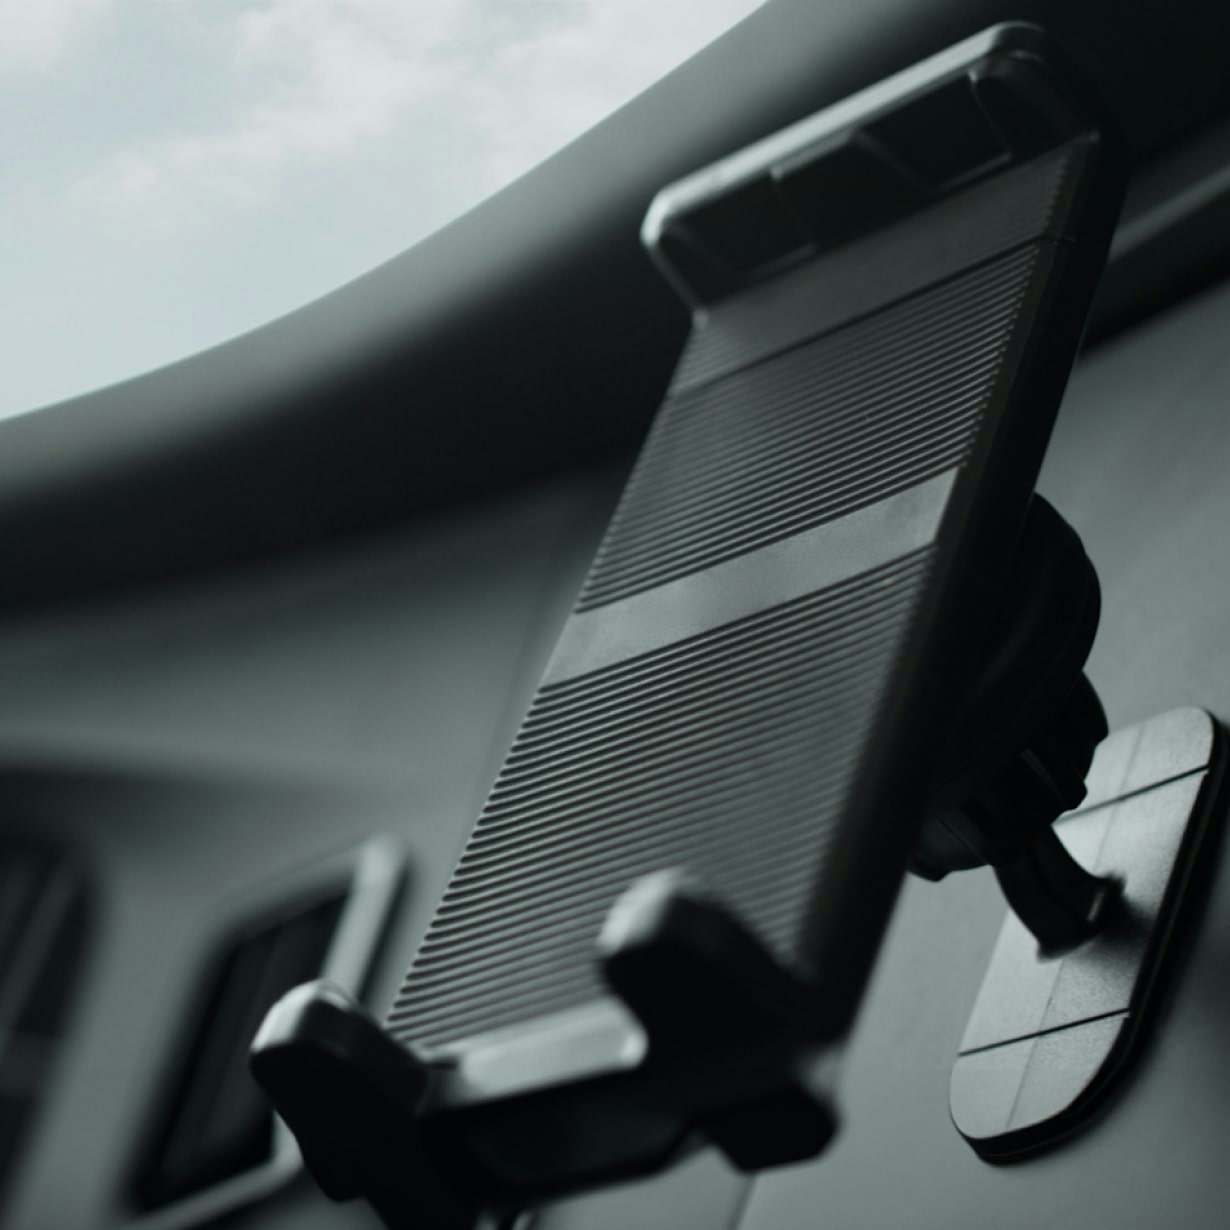 dash mounted mobile device cradle